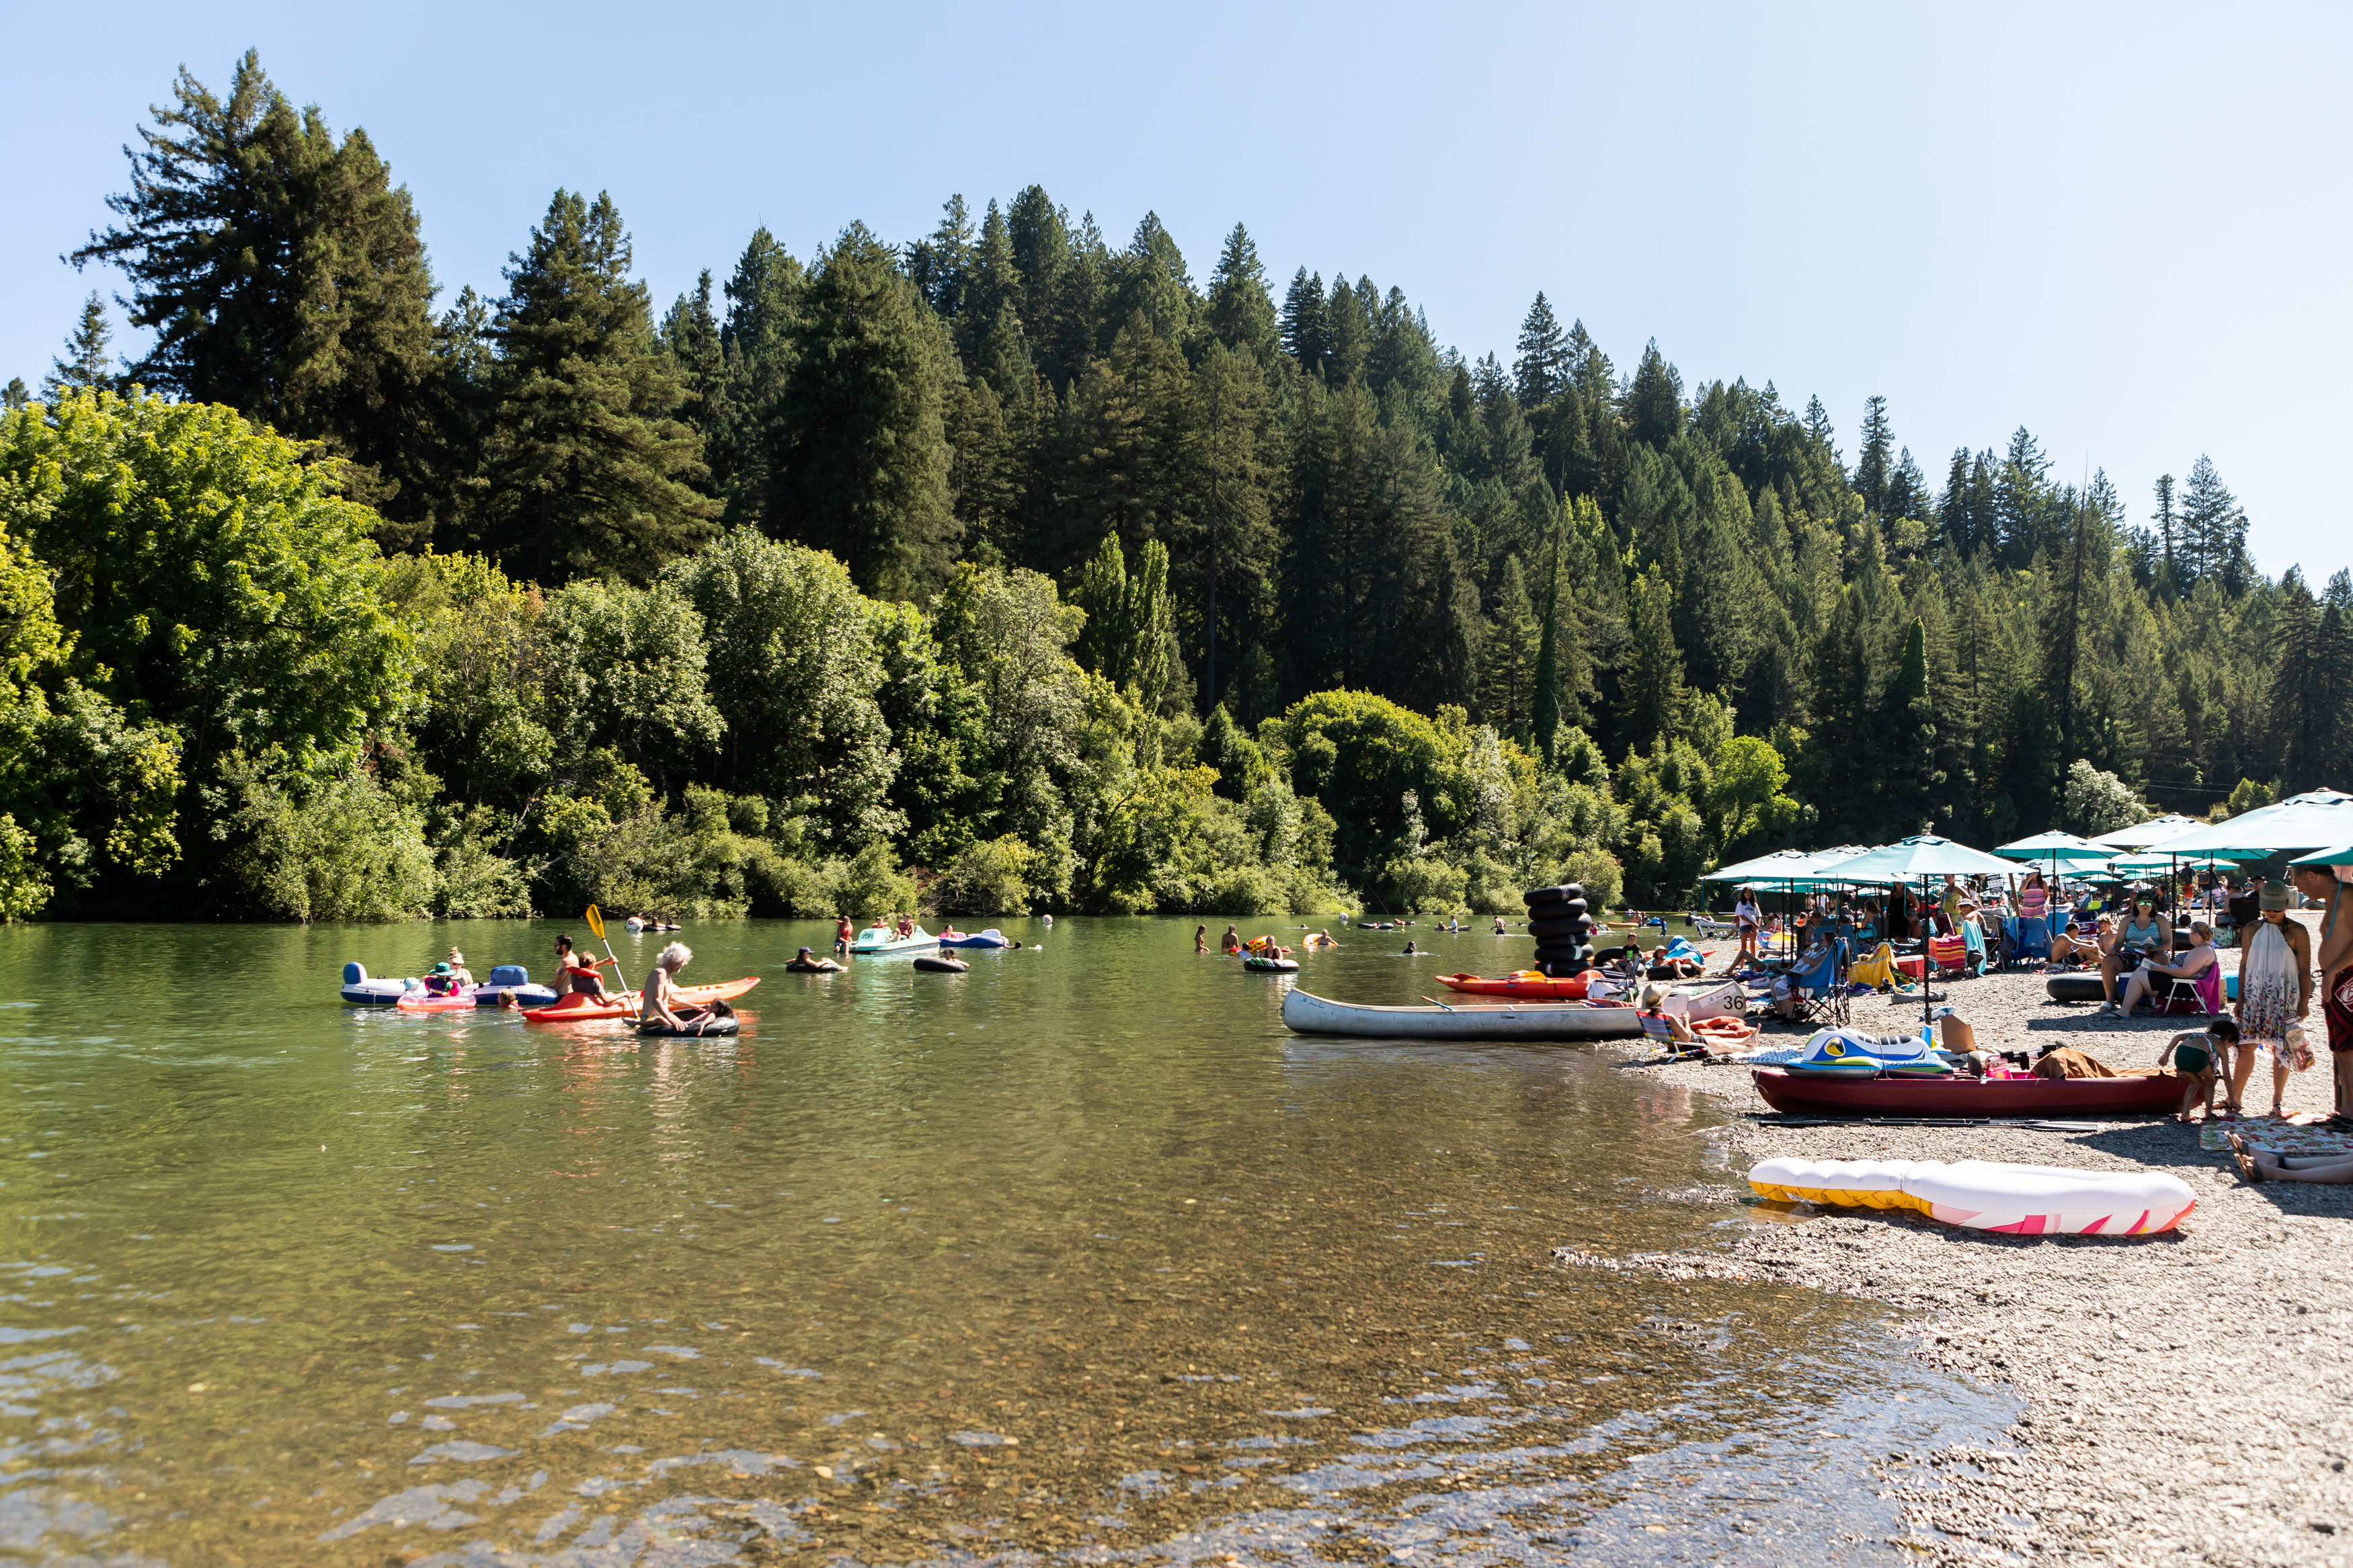 Scene of the Russian River in Guerneville in the sunlight with boats and families on the water.